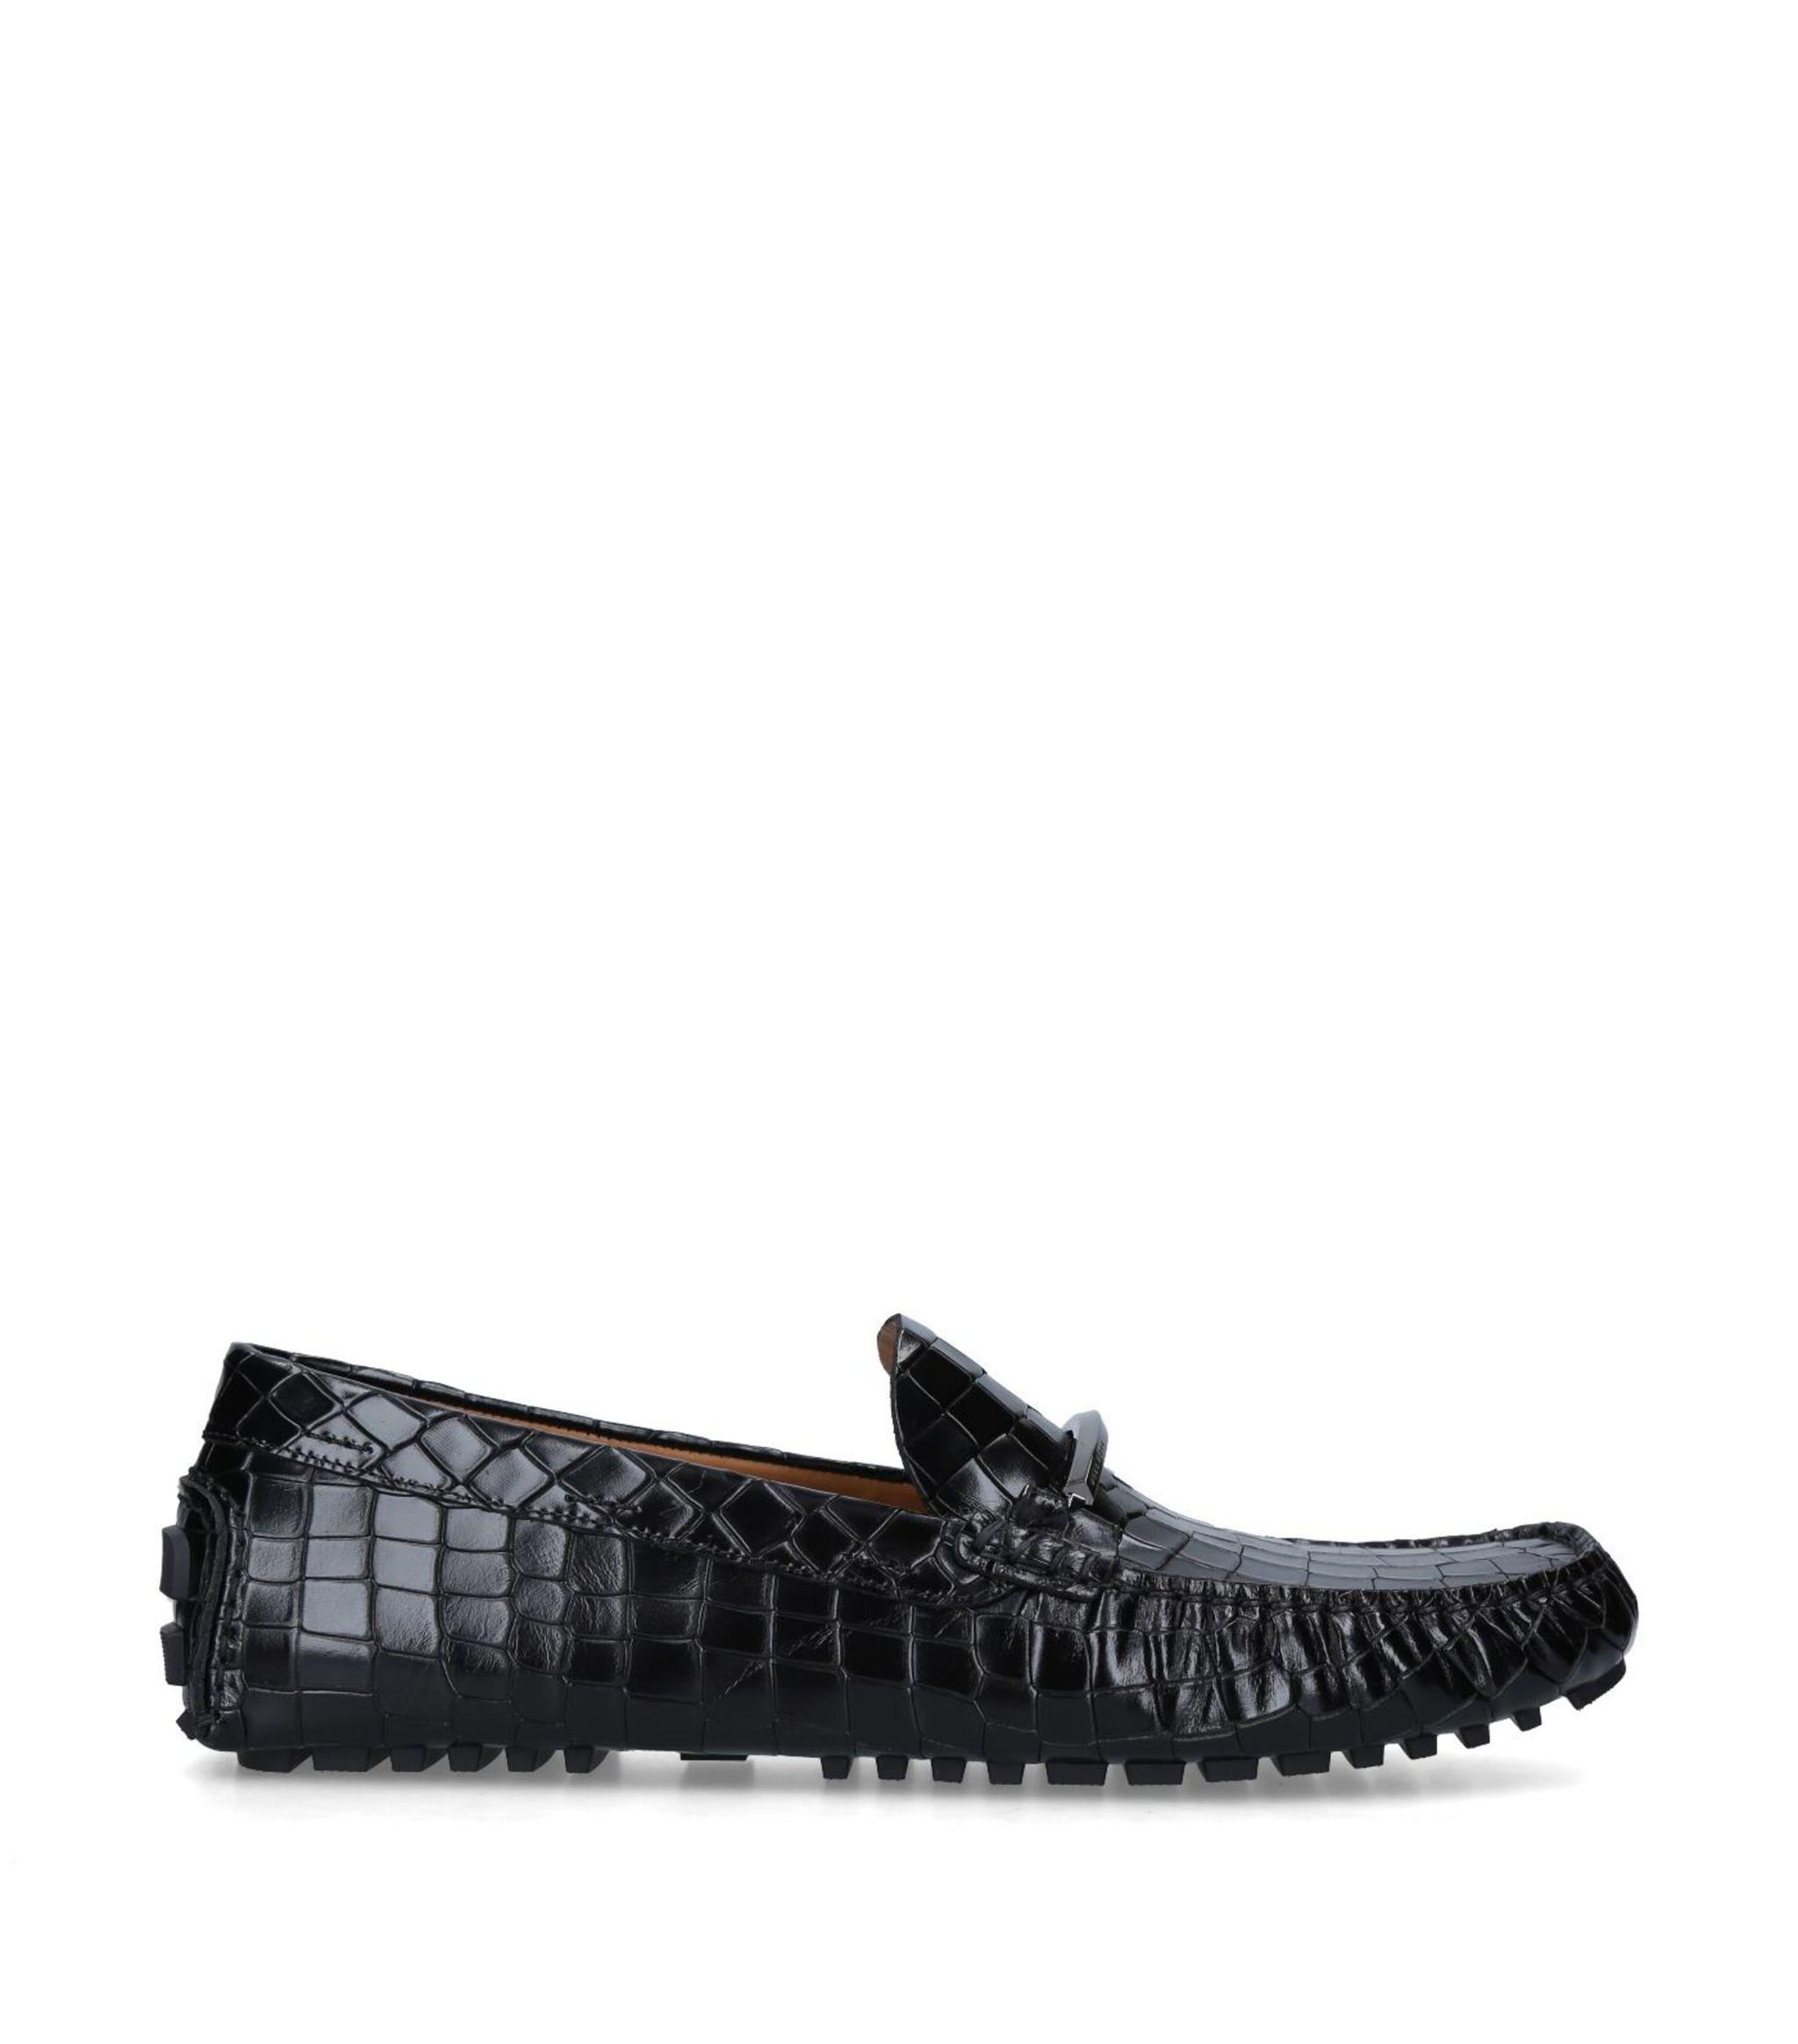 BOSS by Hugo Boss Leather Croc-emed Driving Shoes in Black for Men - Lyst